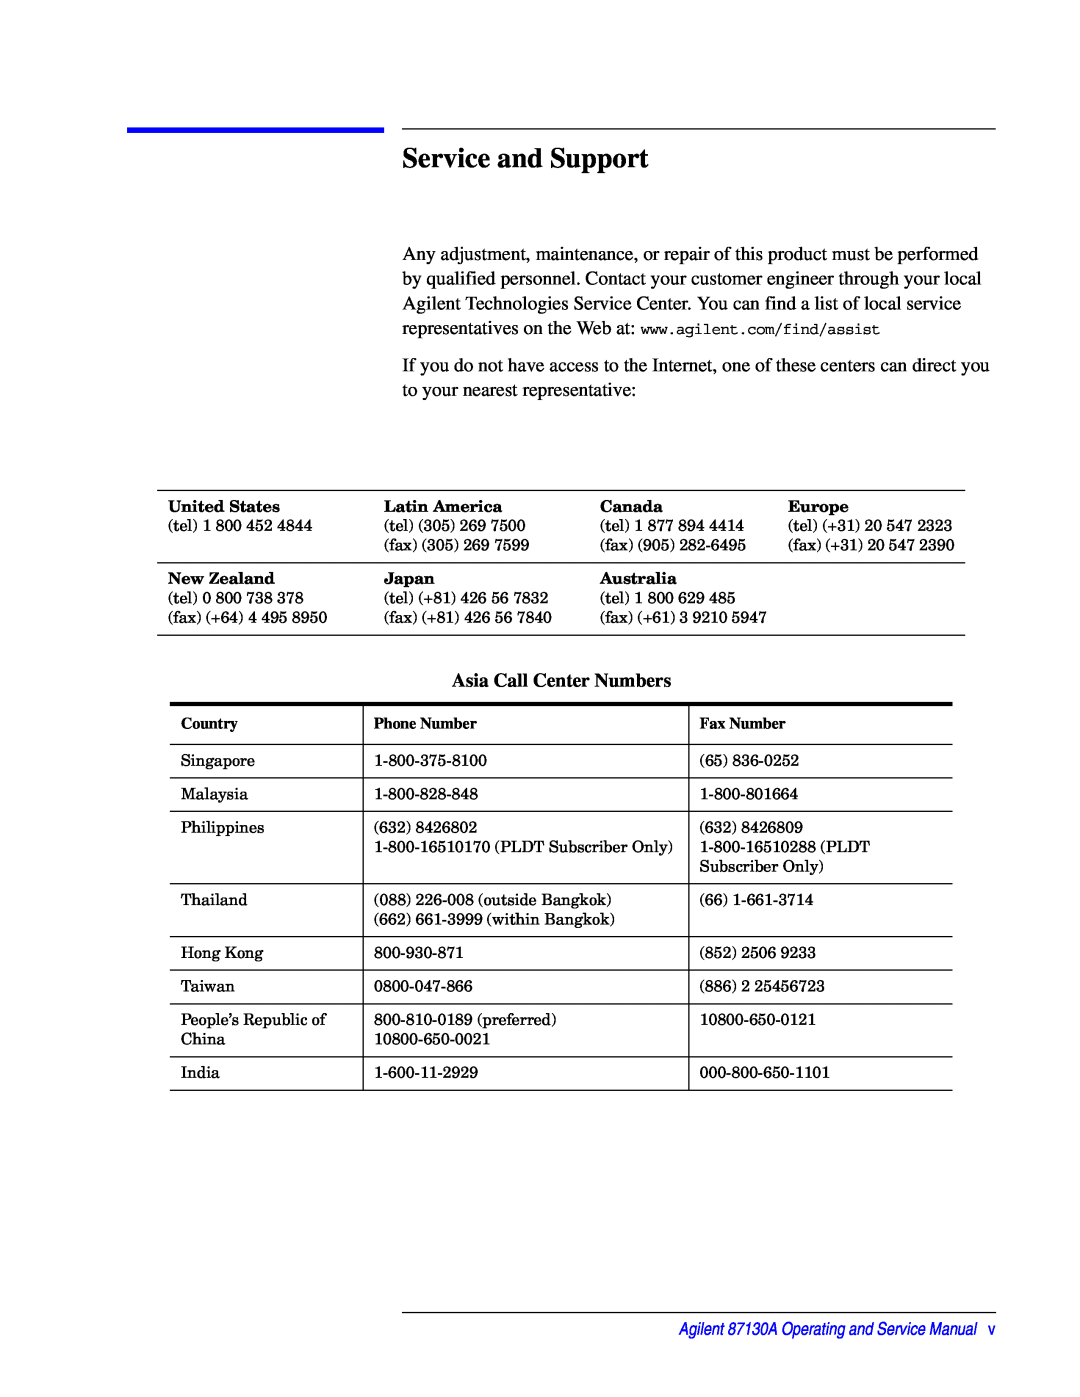 Agilent Technologies Service and Support, Asia Call Center Numbers, Agilent 87130A Operating and Service Manual, Canada 